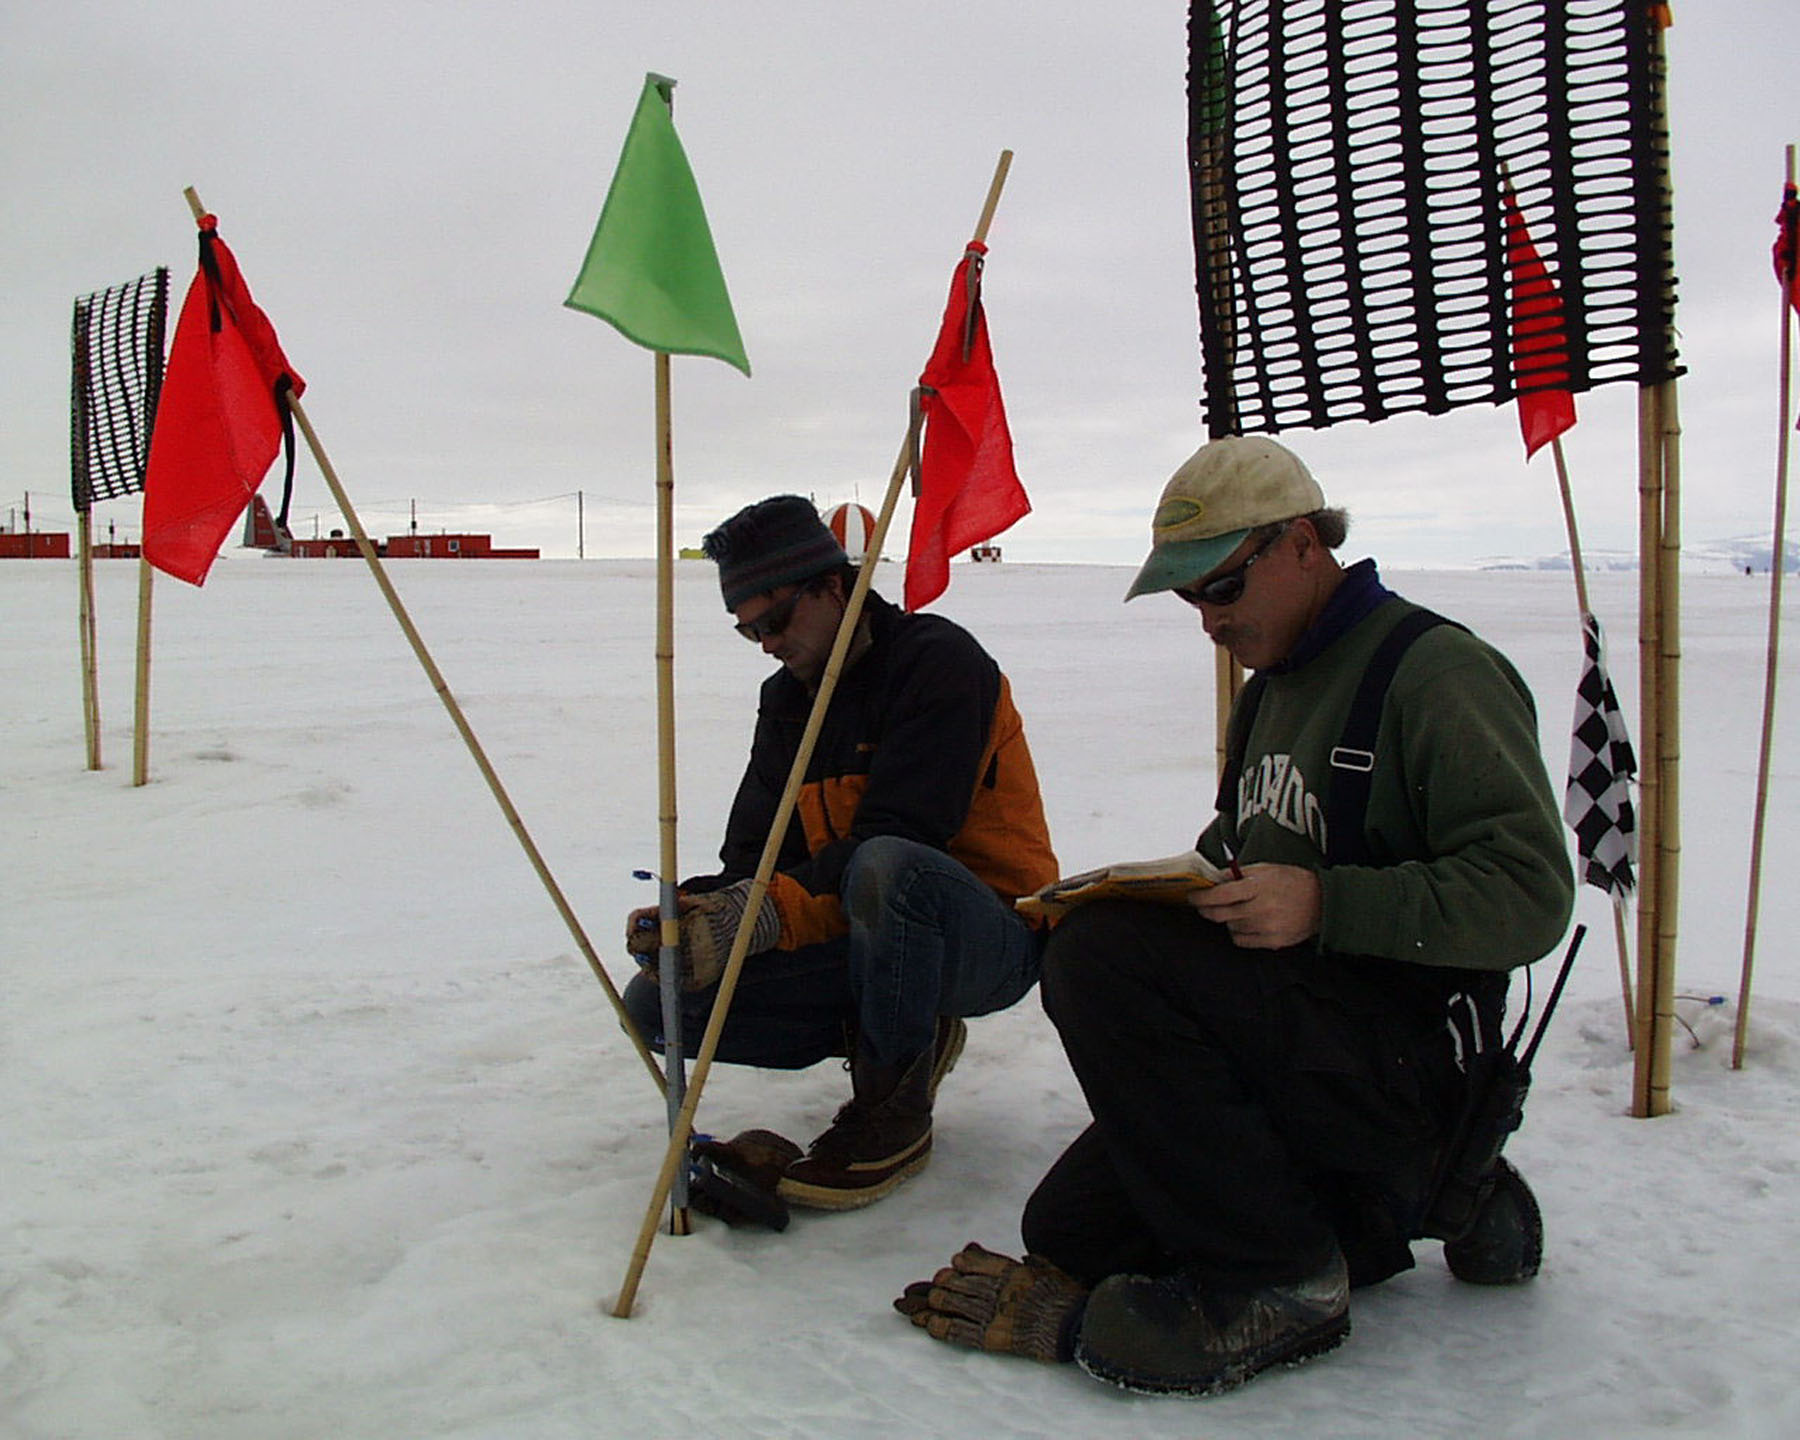 Two men kneel on the the ice near flagged bamboo poles.